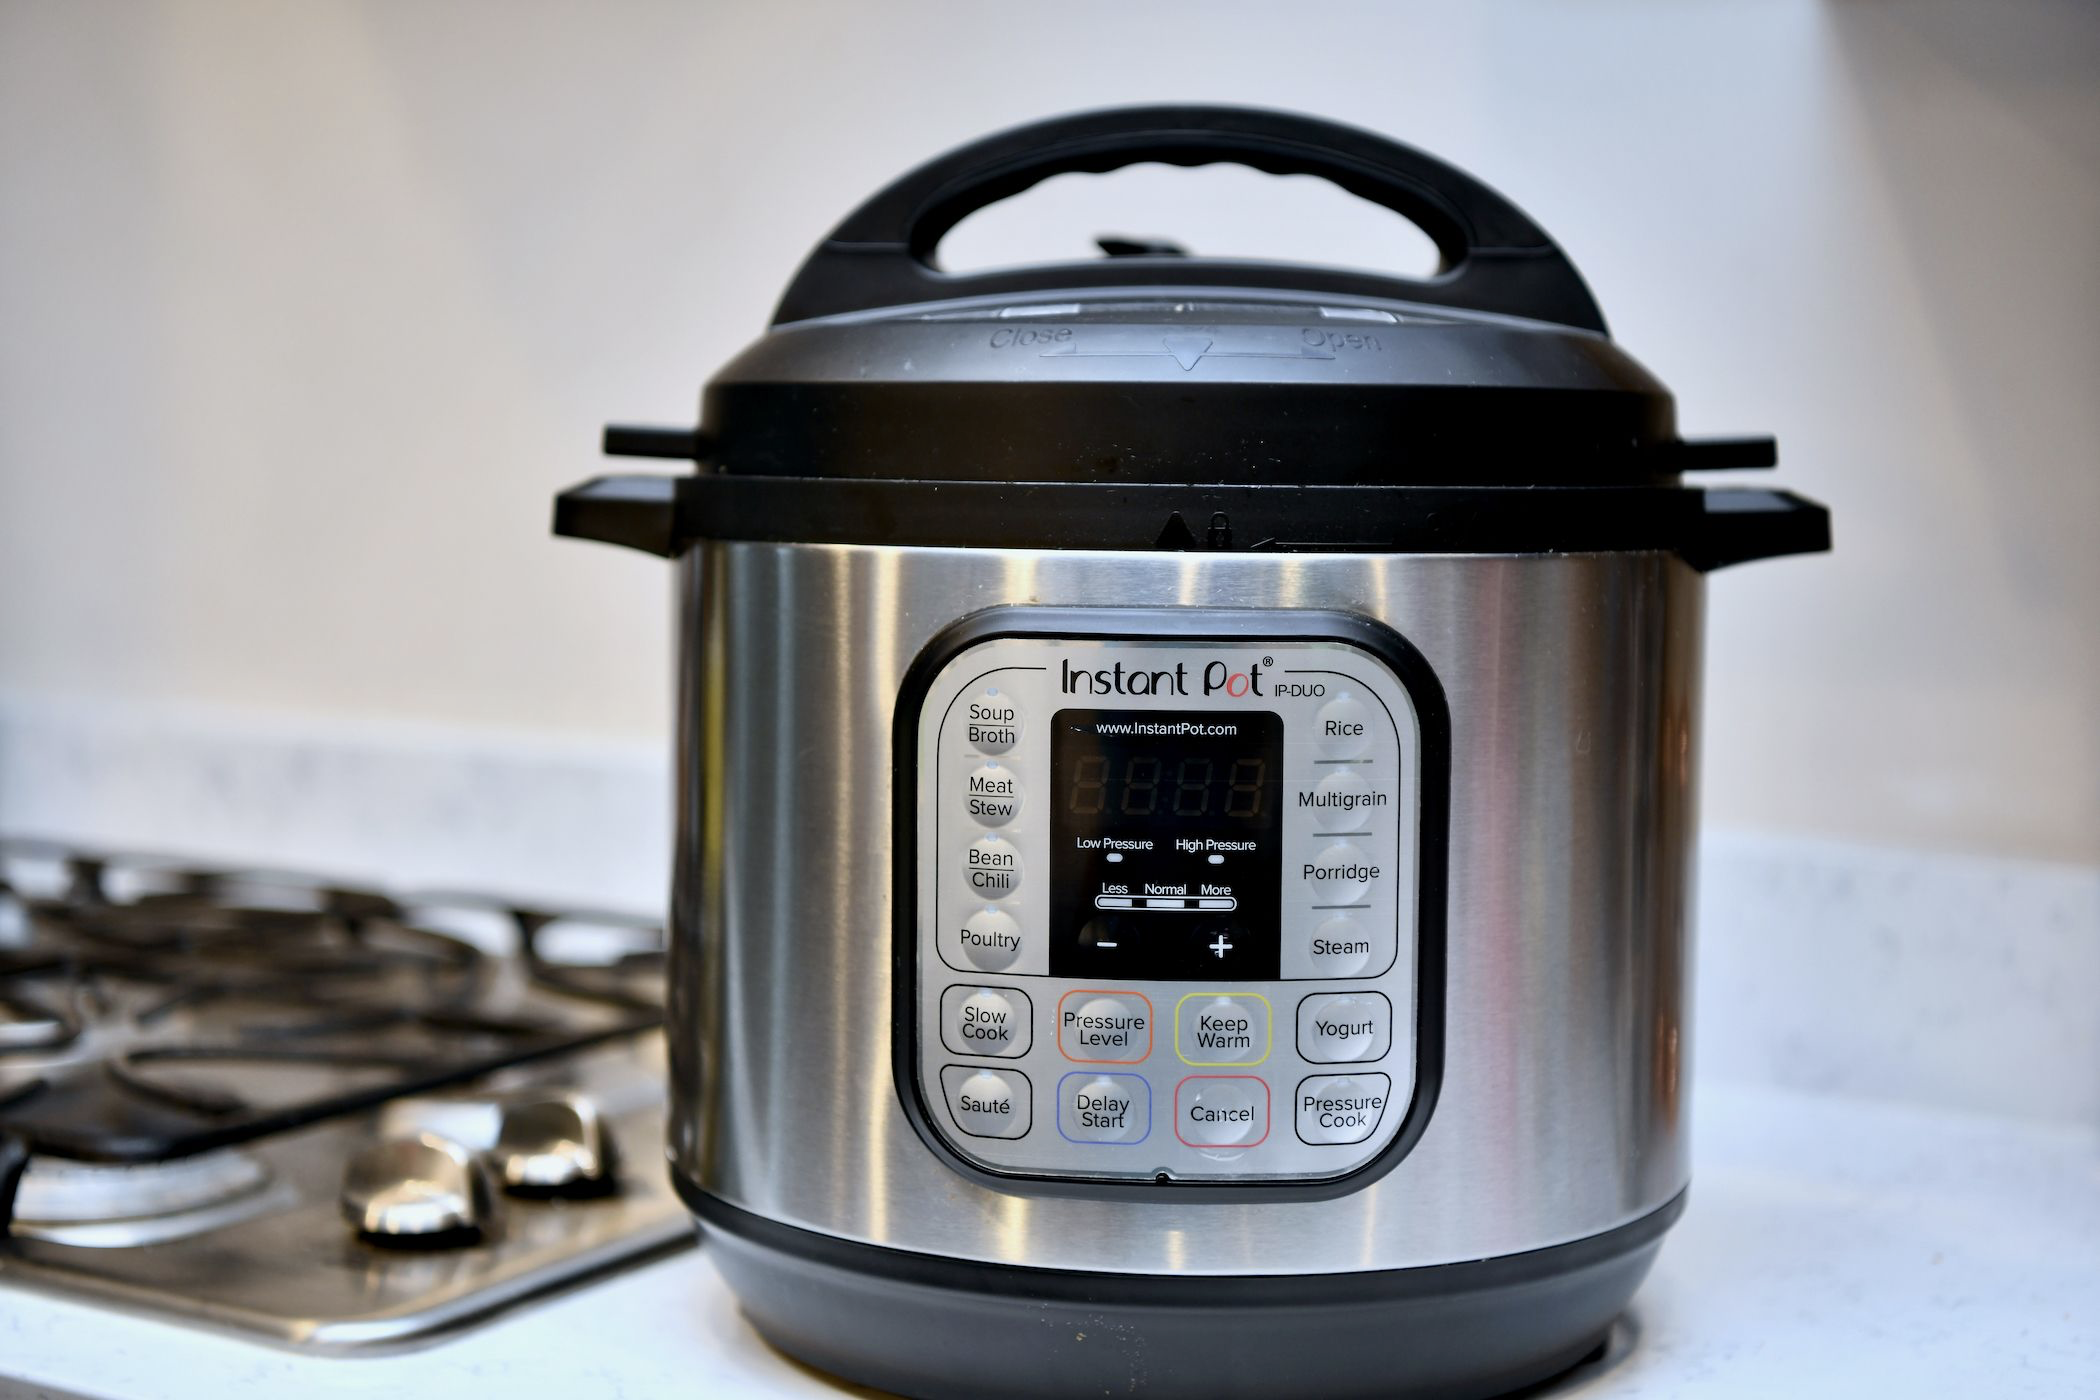 Tips & Tricks to Clean Your Electric Pressure Cooker - Professional Series